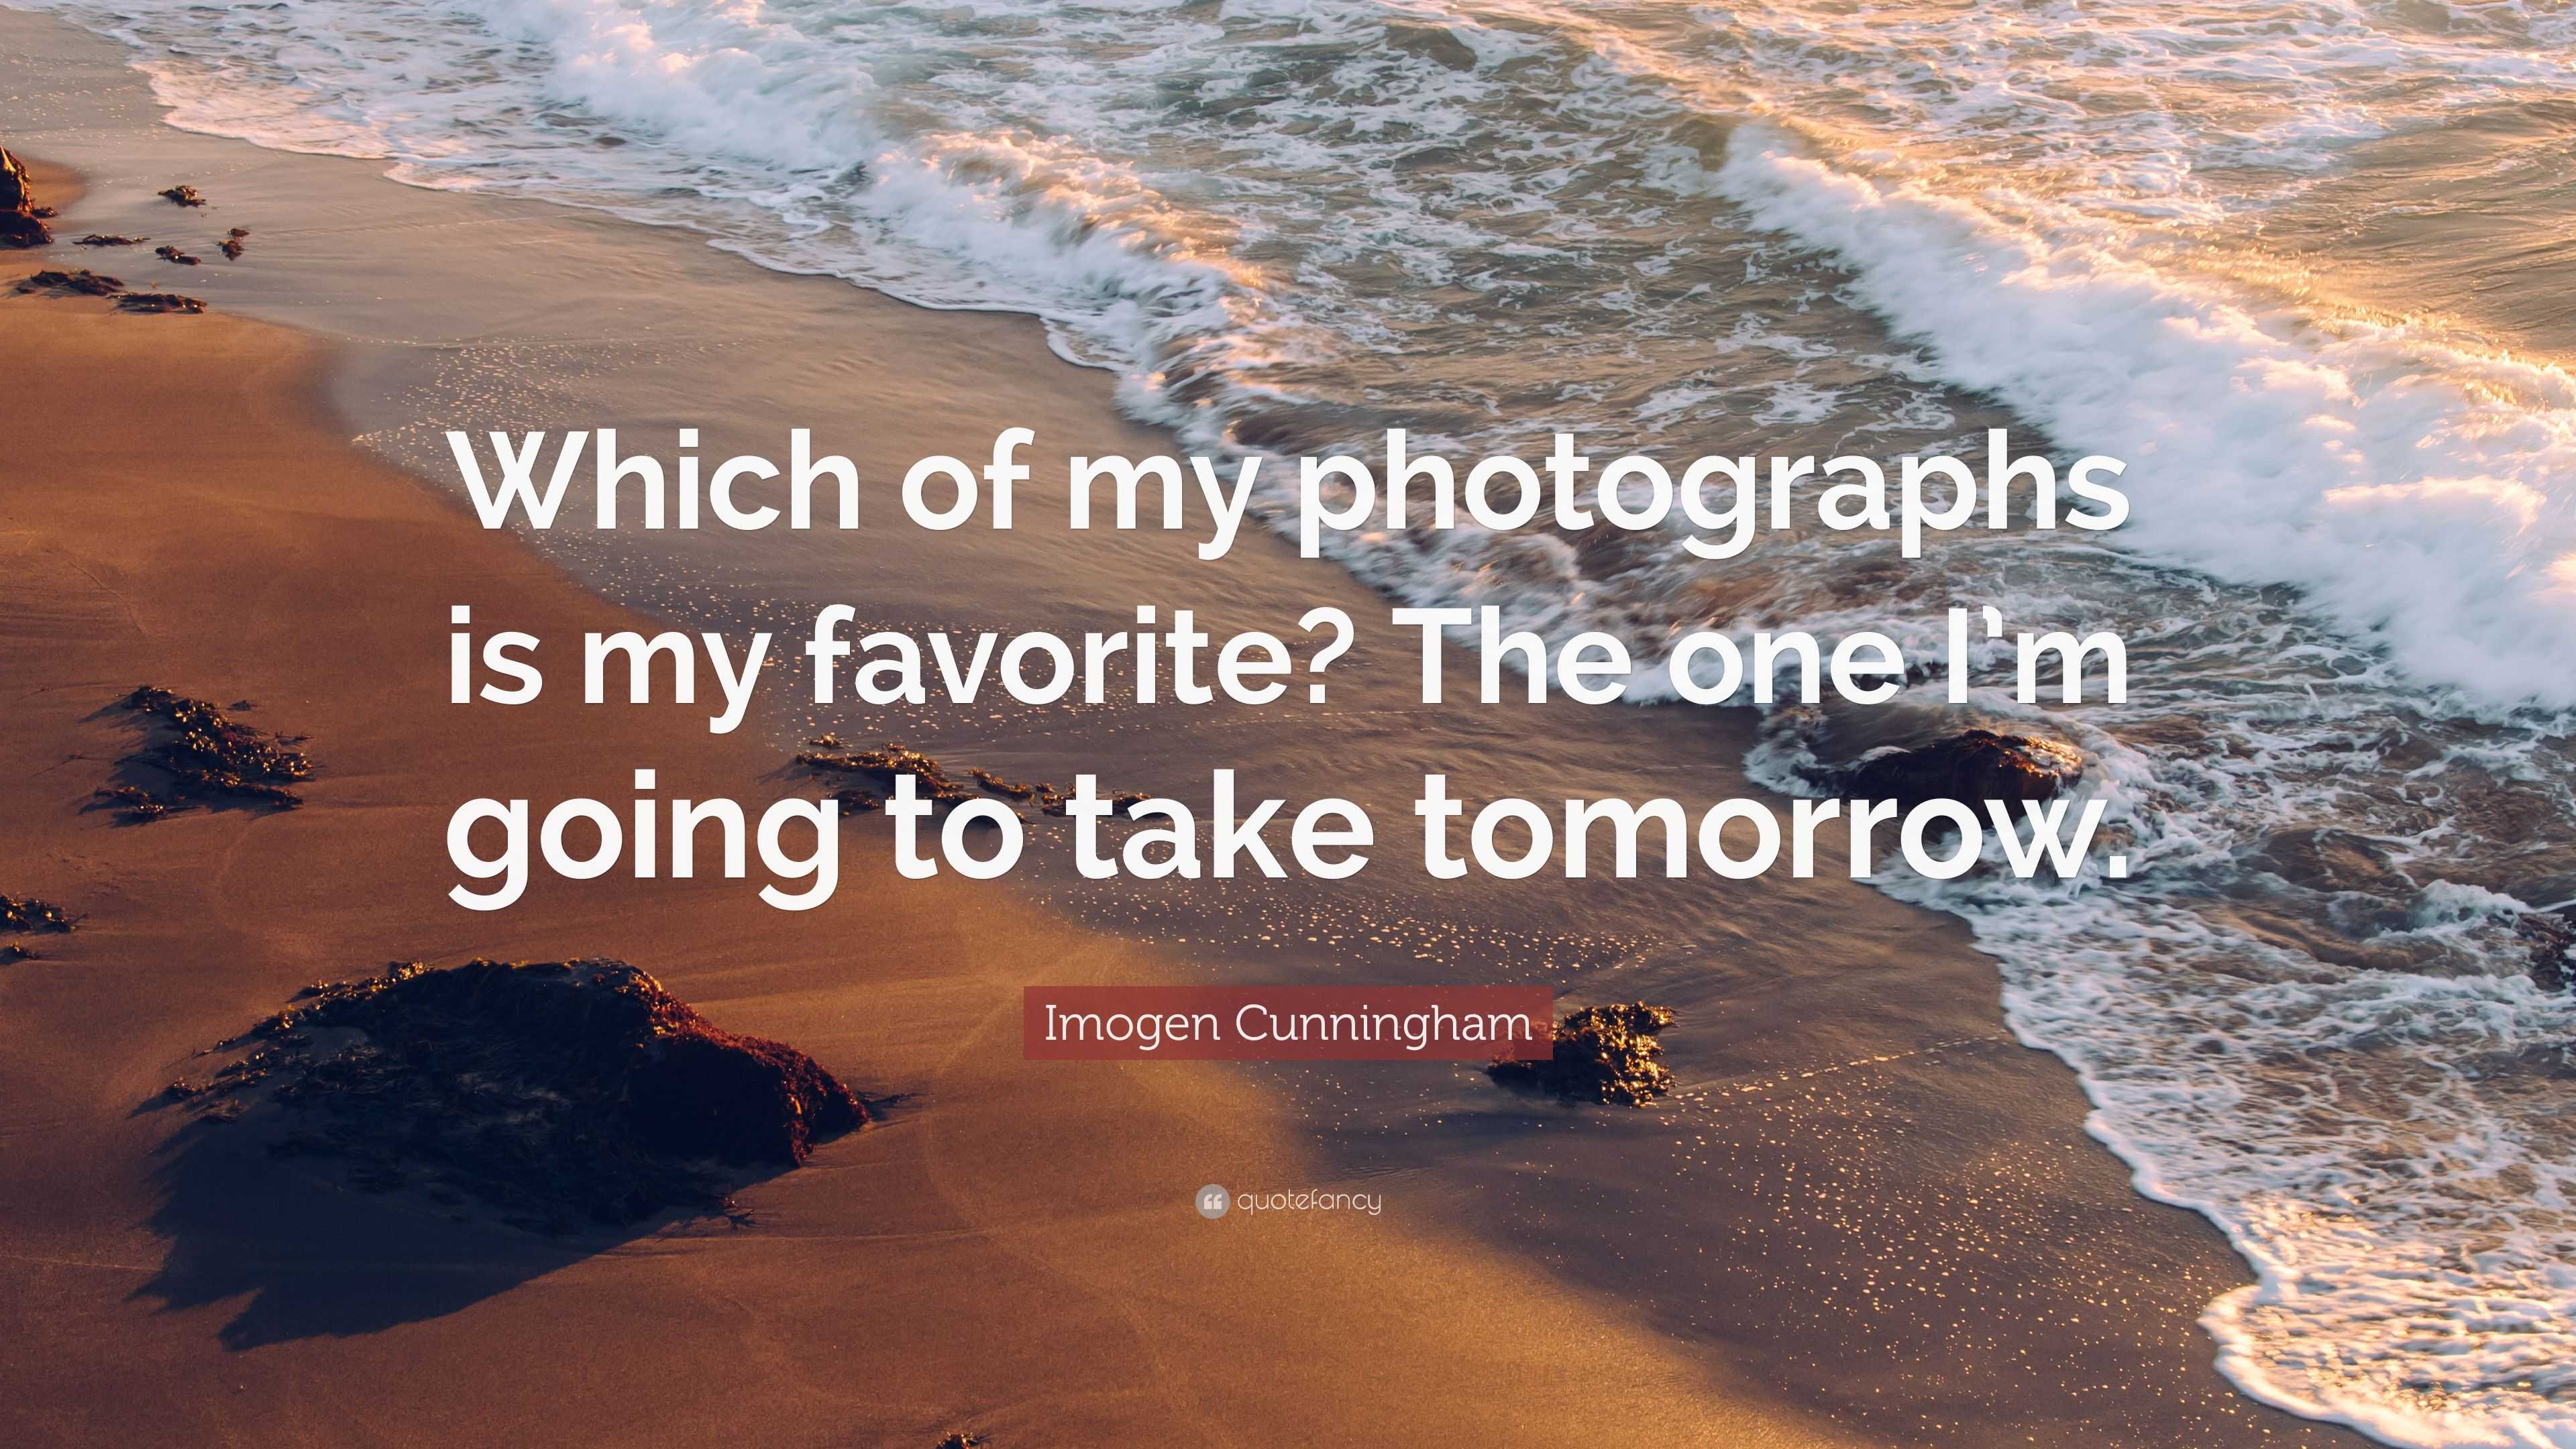 Imogen Cunningham Quote: “Which of my photographs is my favorite? The ...